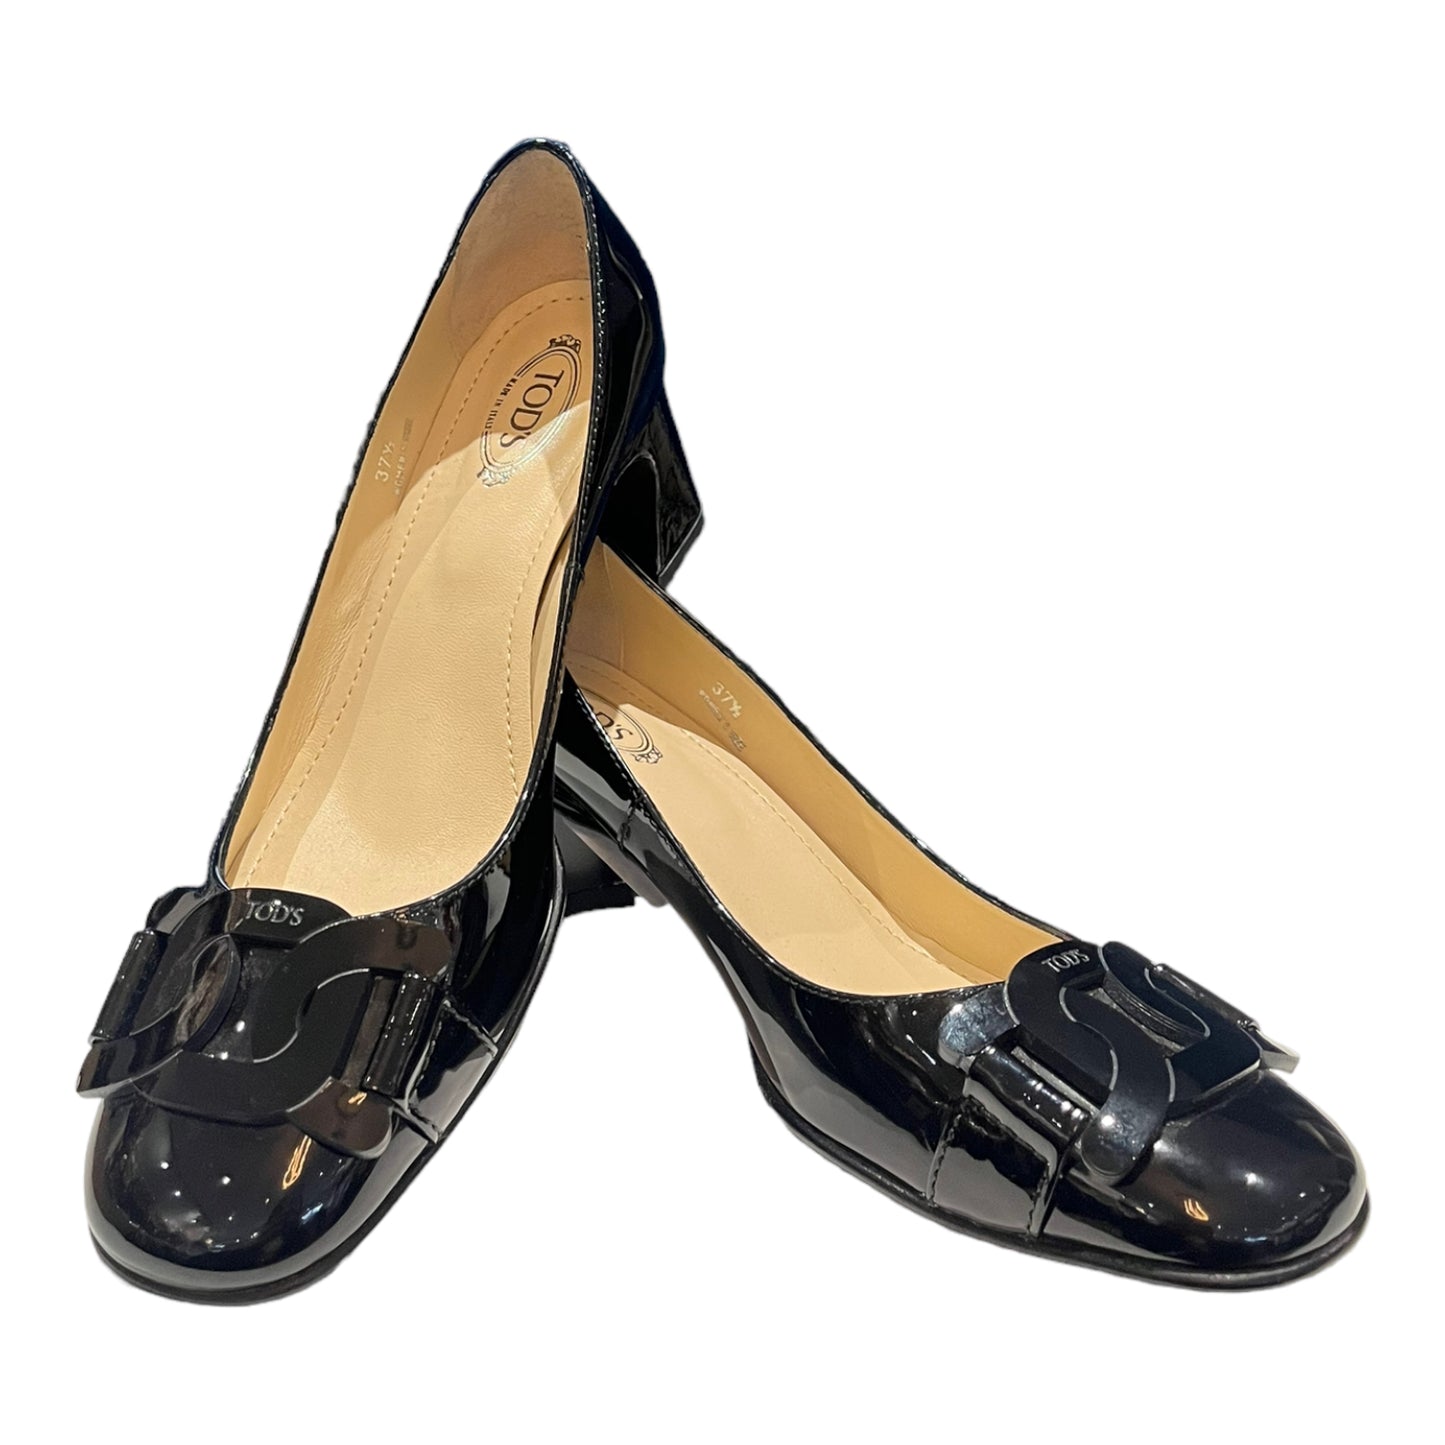 NEW Tod's Black Patent Loafer Heels